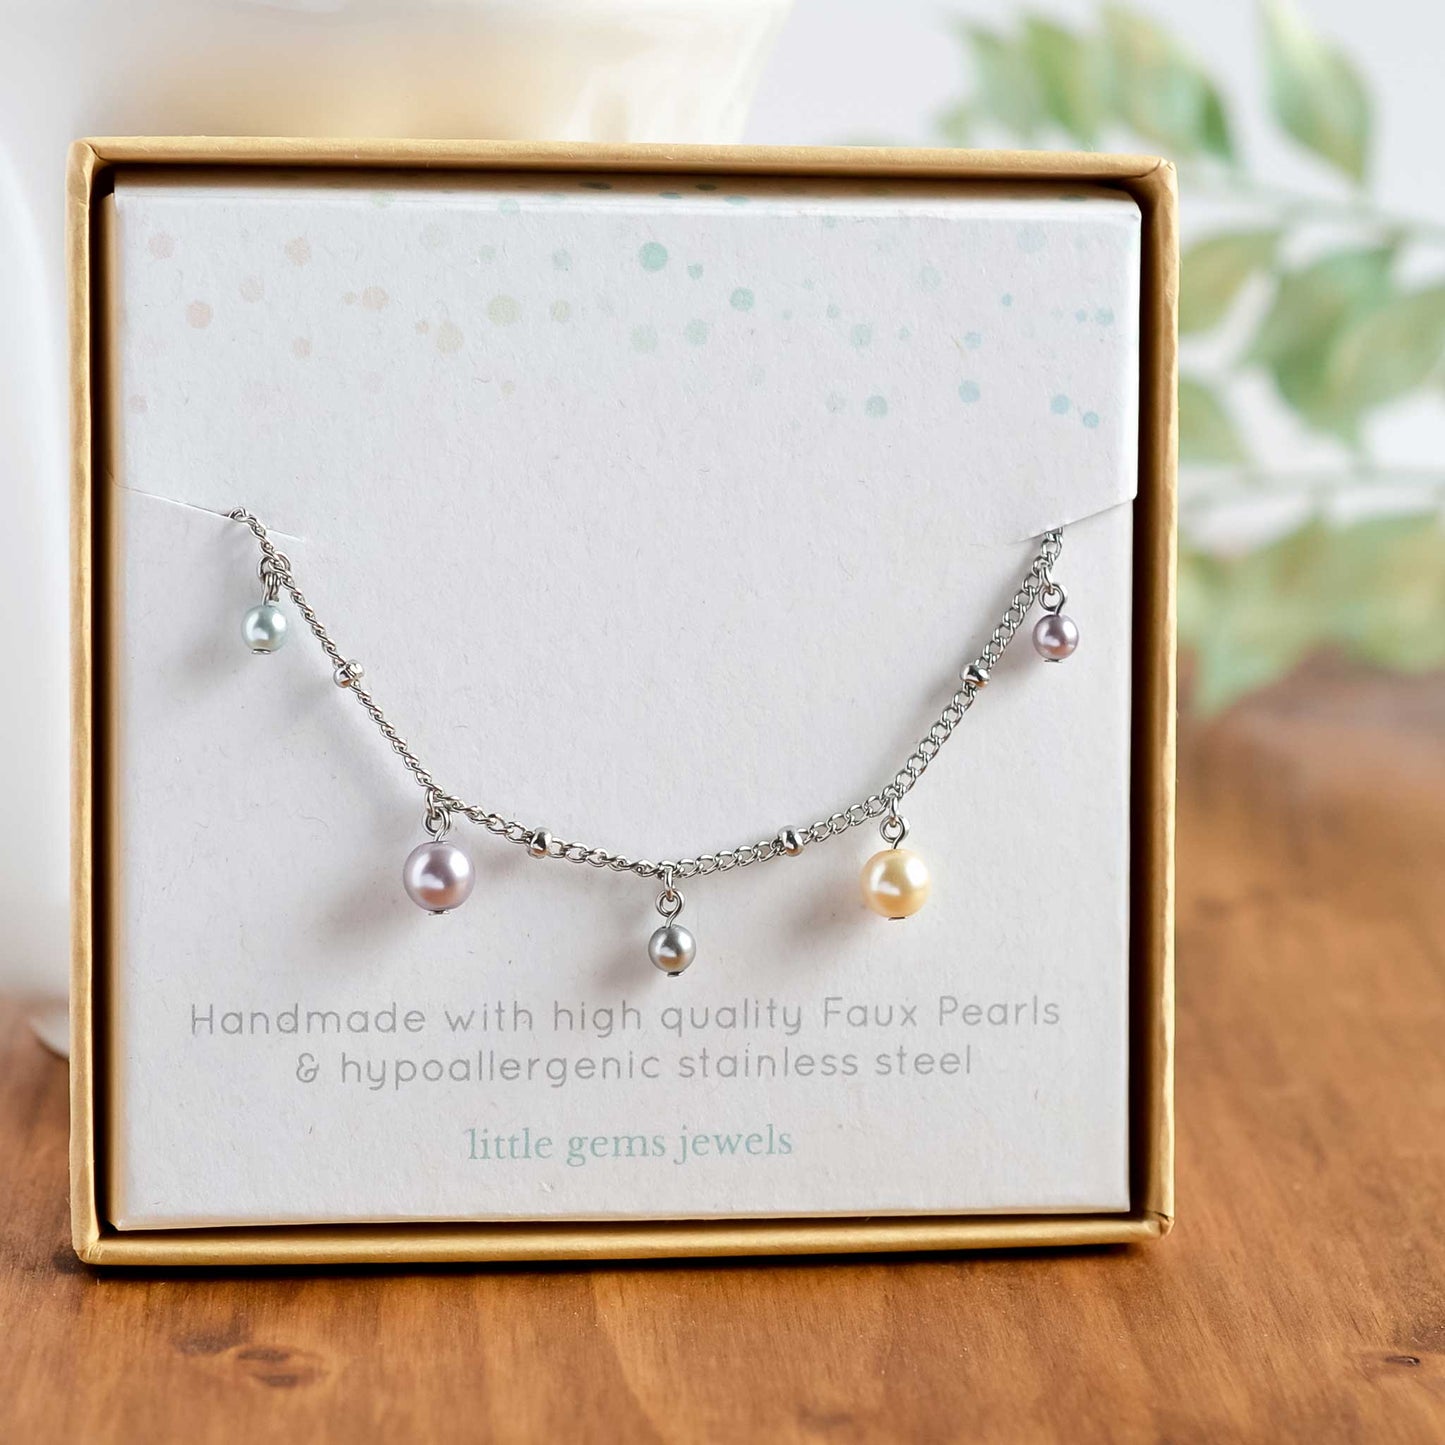 Faux pearl charms bracelet in eco friendly gift box